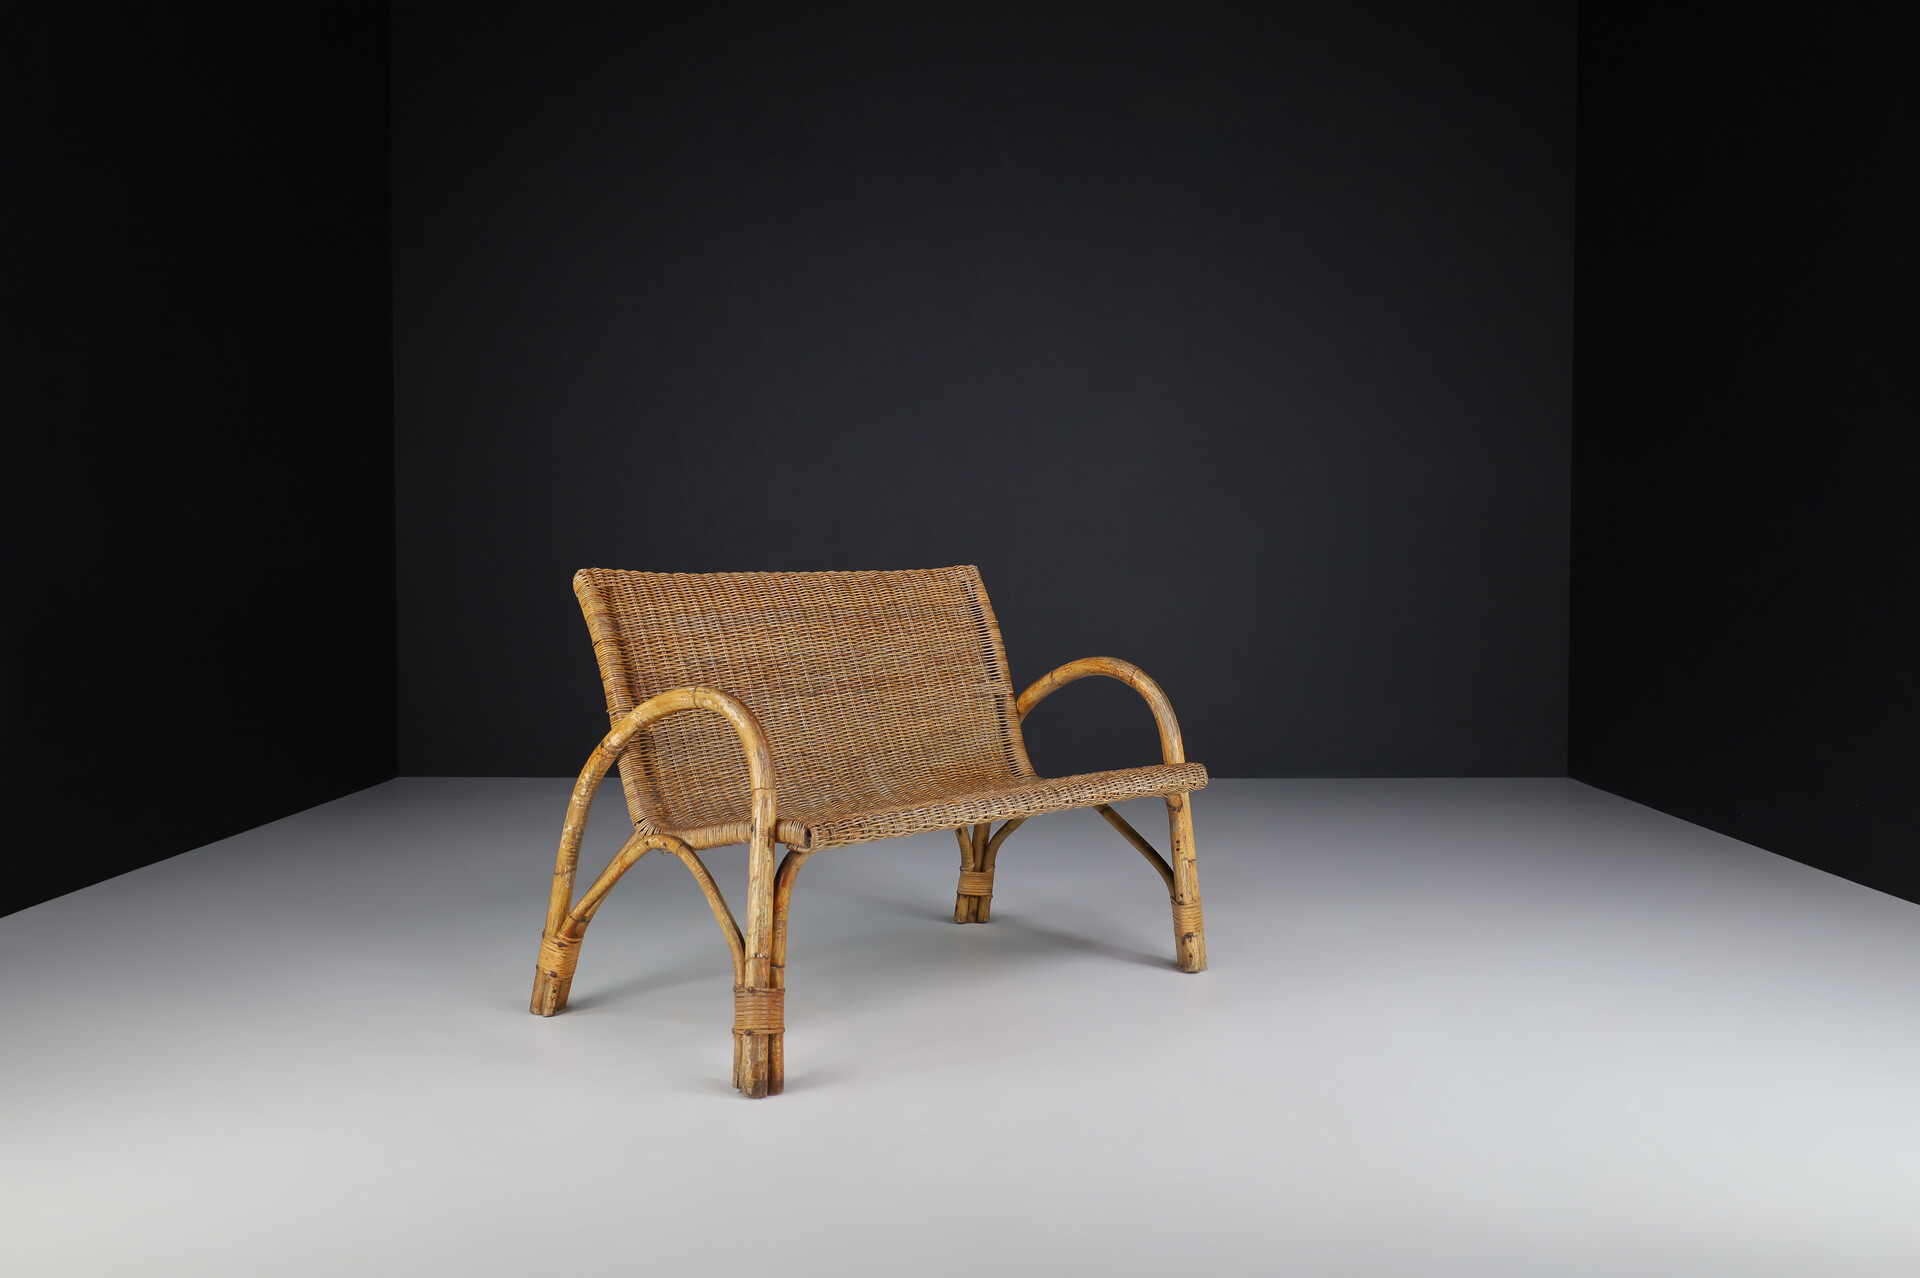 Mid century modern Bamboo and wicker bench, France 1960s Mid-20th century